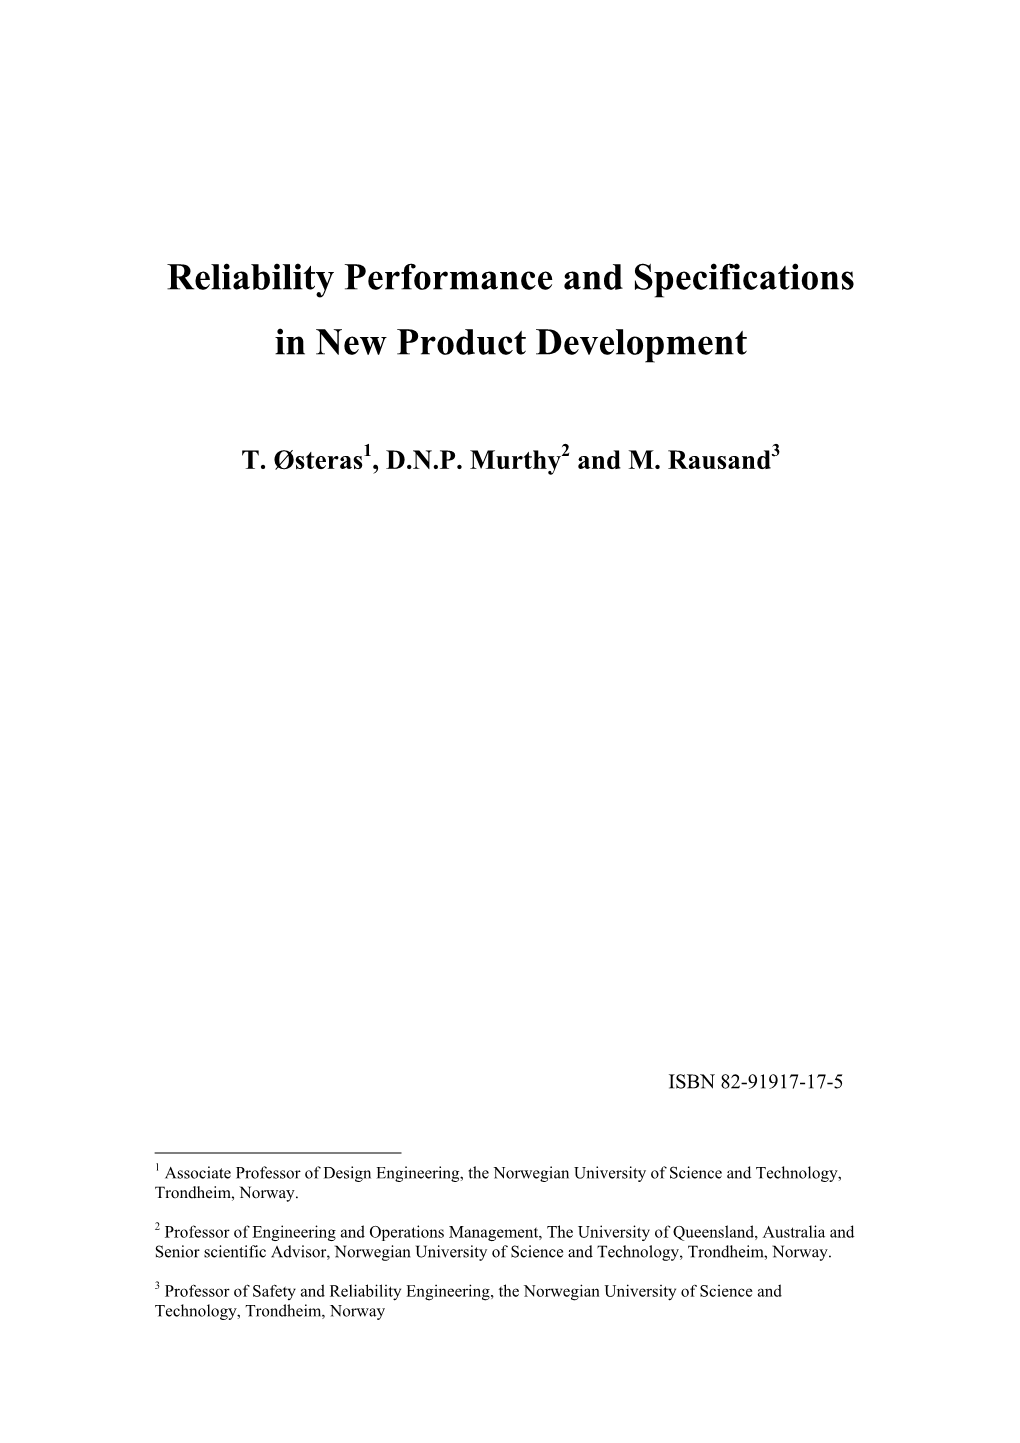 Reliability Performance and Specifications in New Product Development